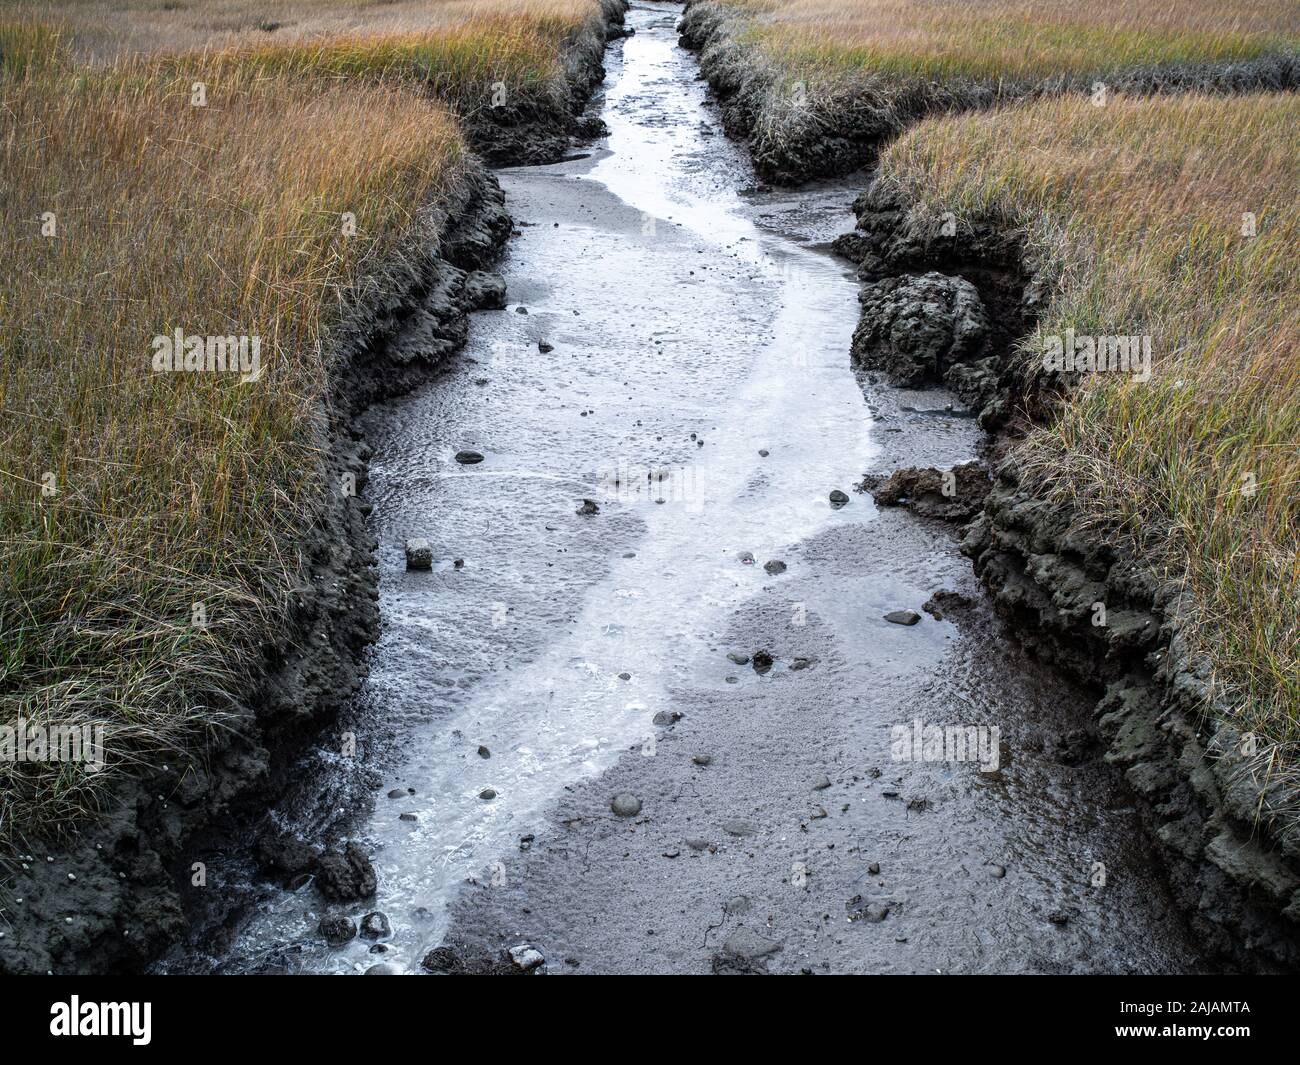 A Dried Up Stream Bed at Low Tide Stock Photo